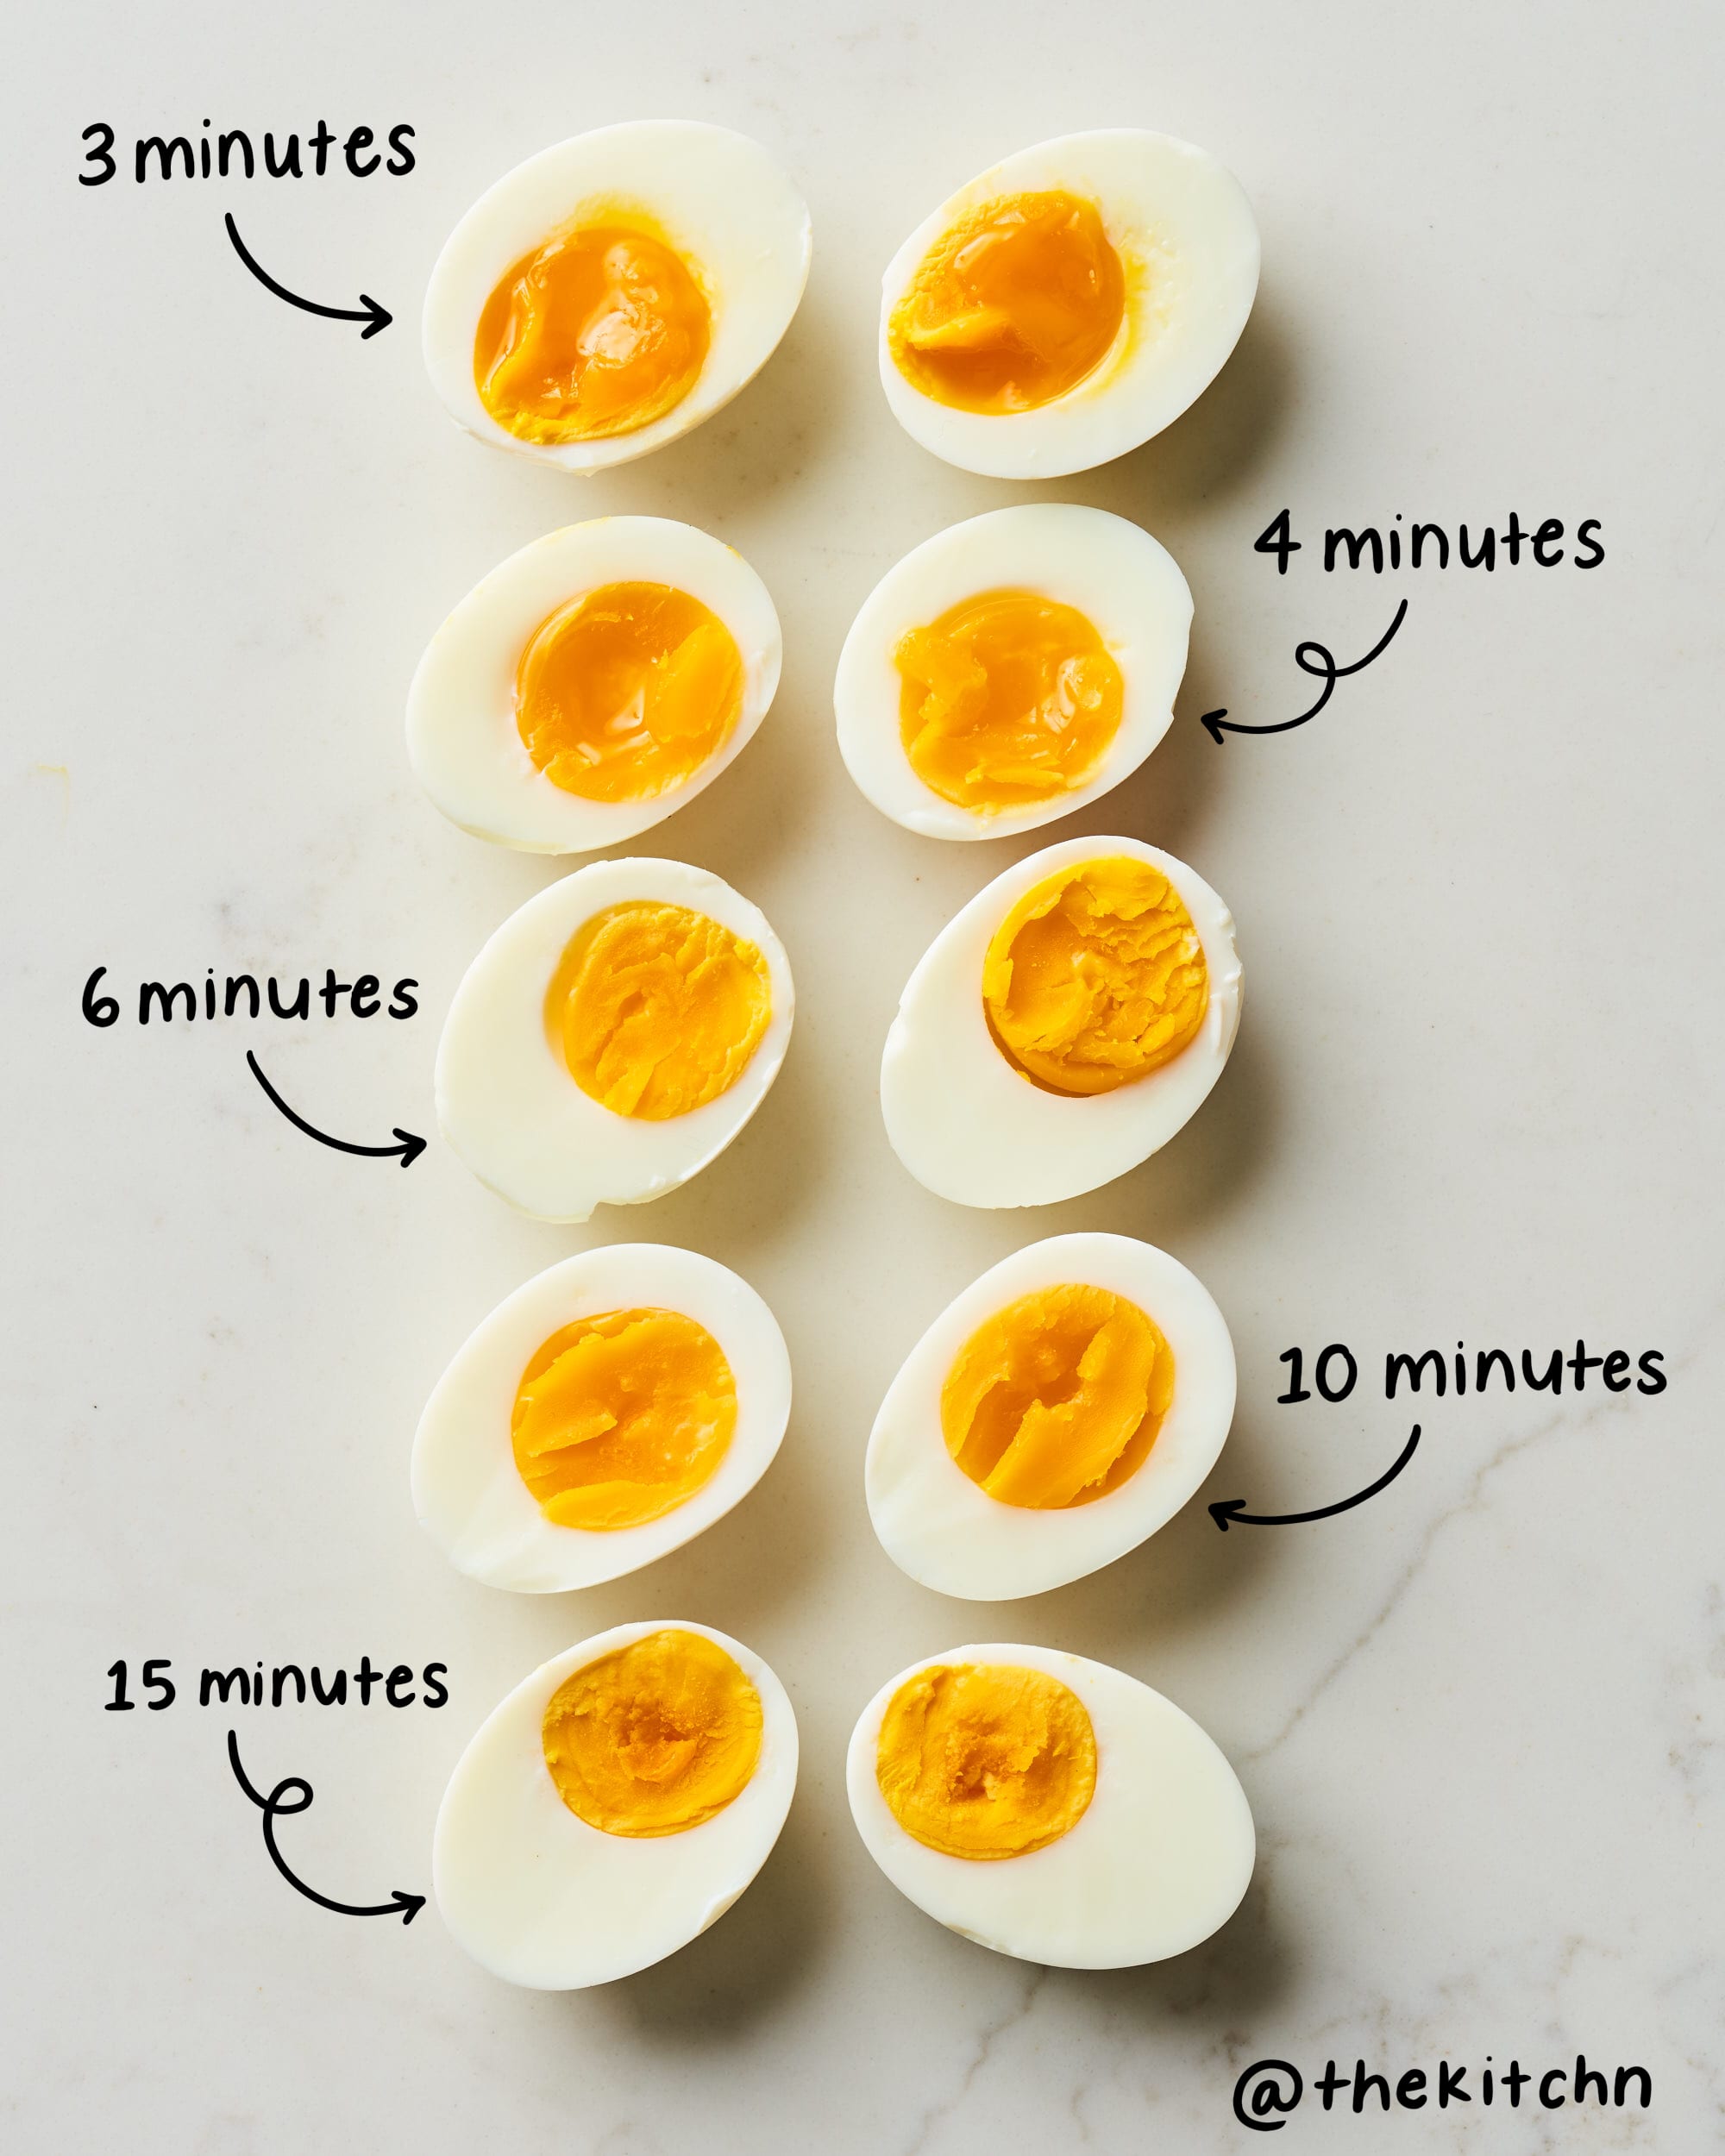 How To Hard-Boil Eggs